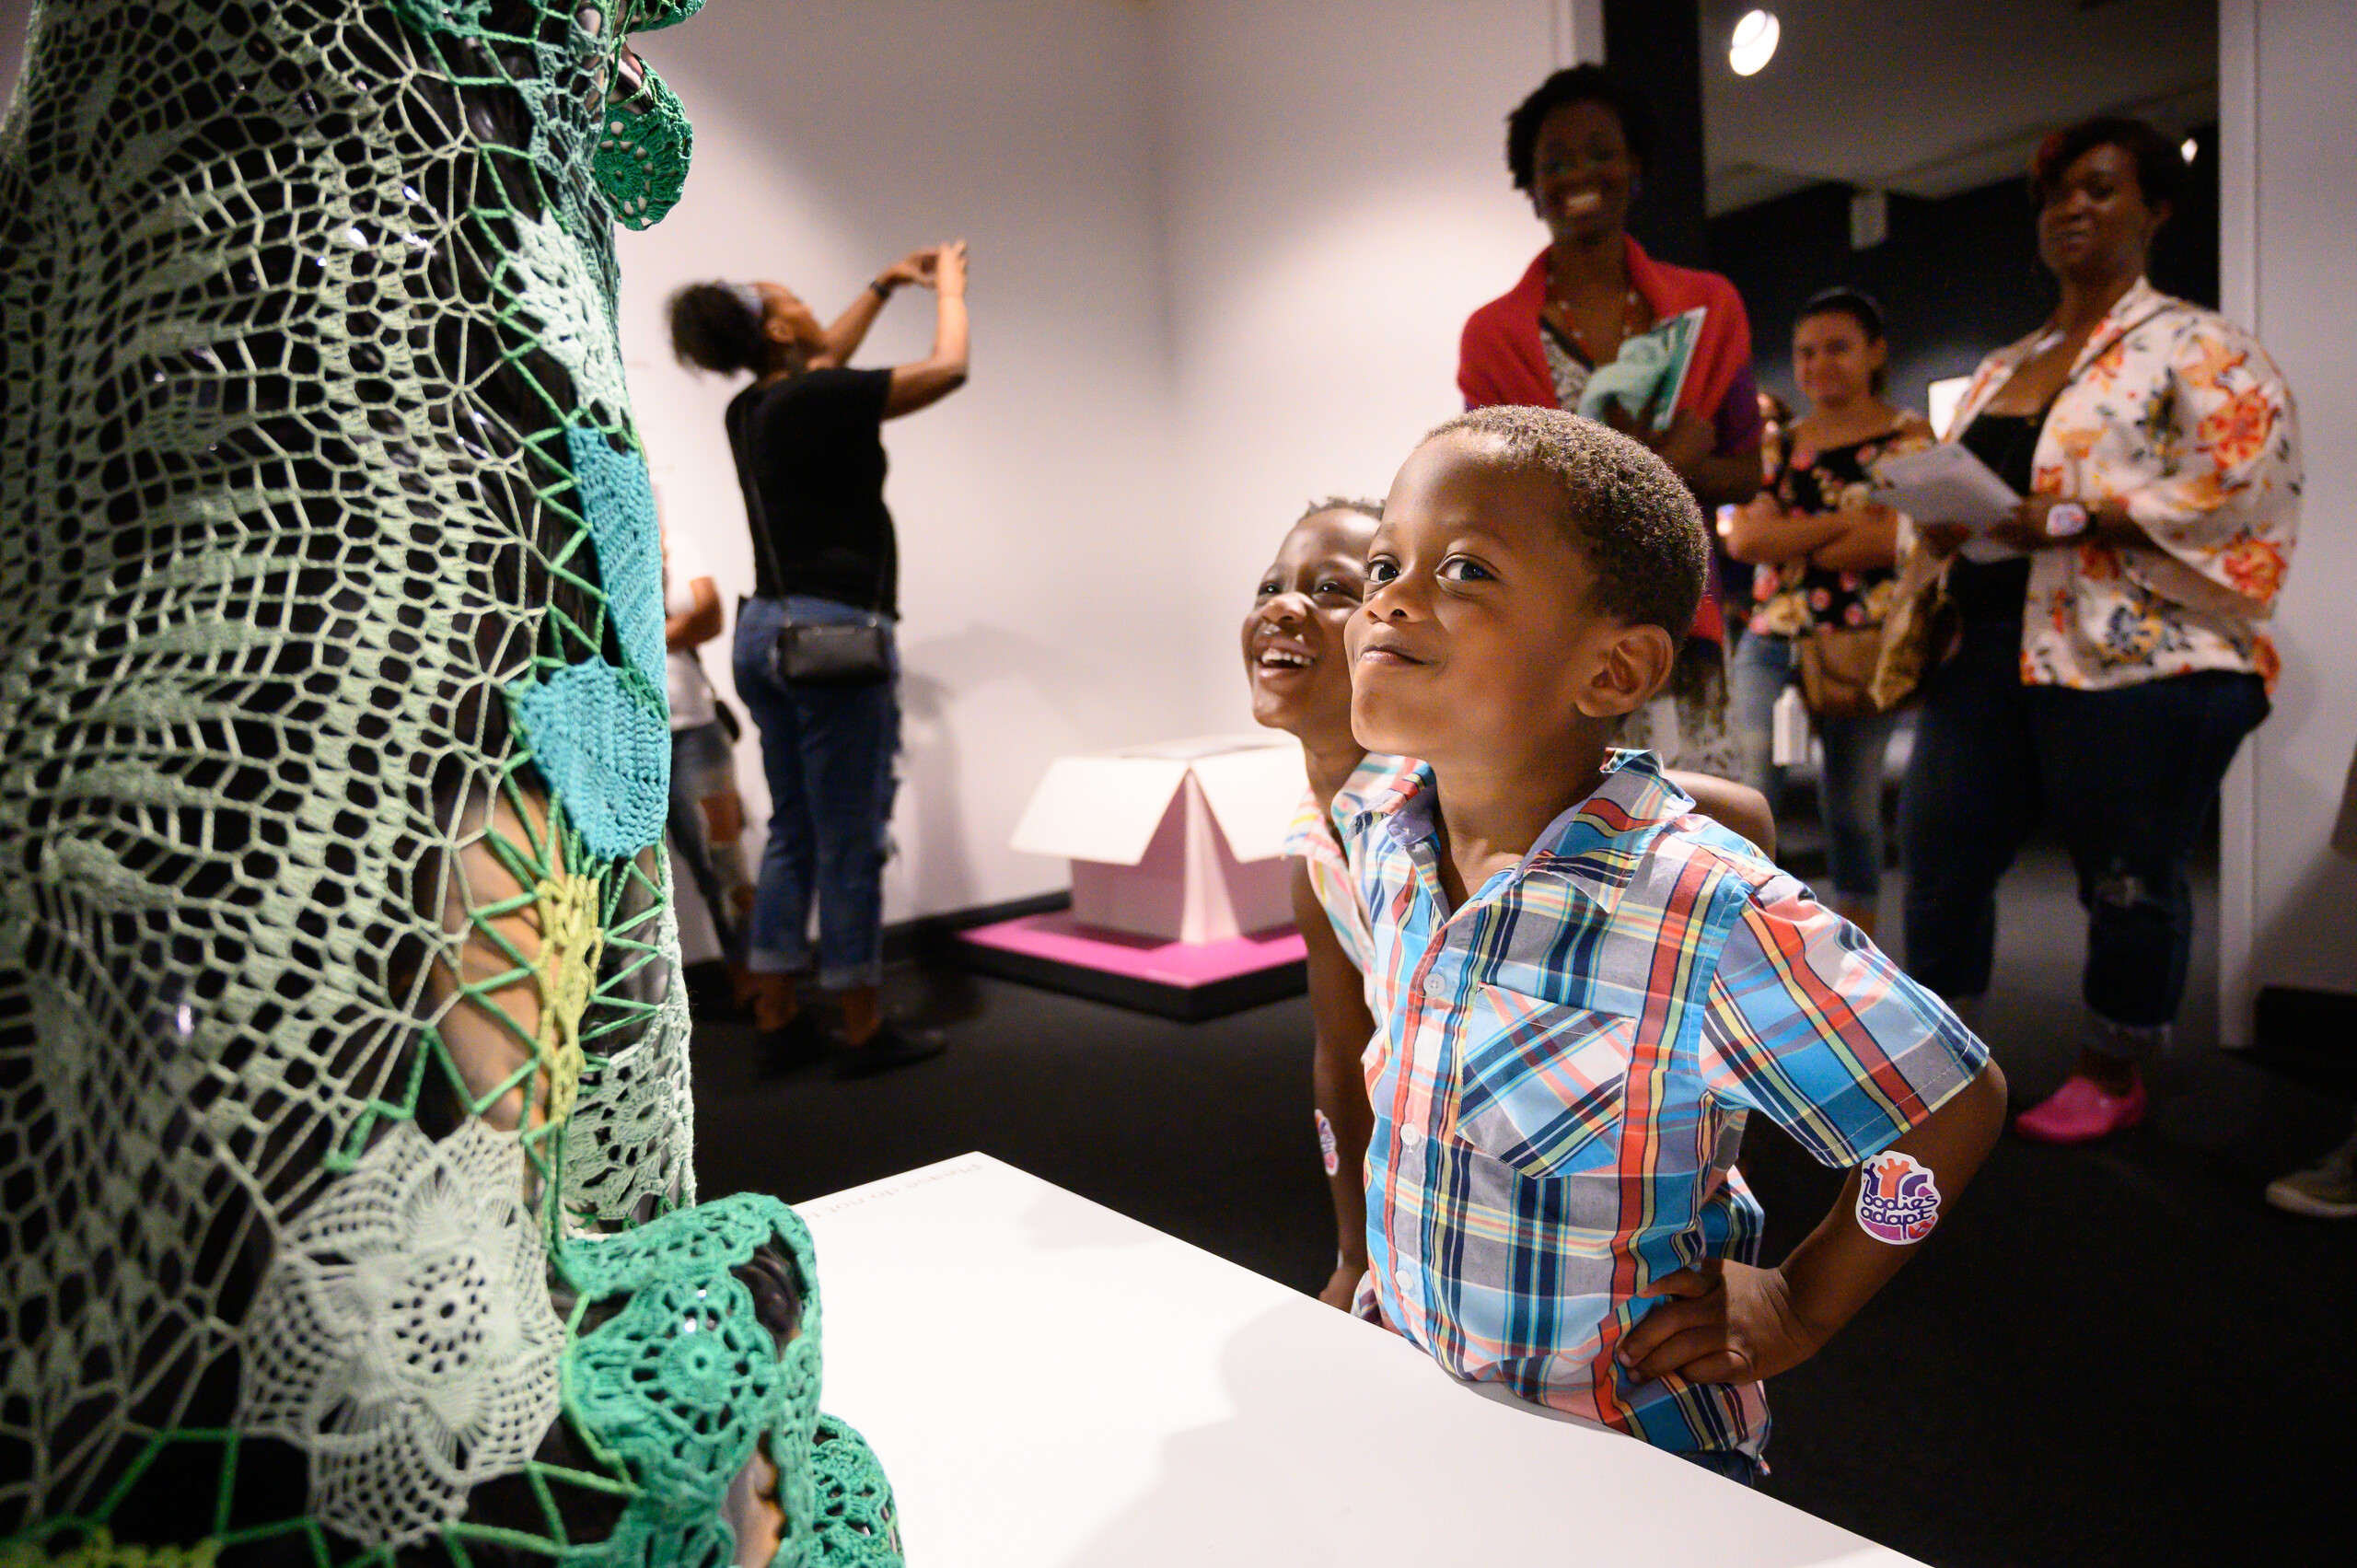 Two young children with medium skin tone stand in front of a dog sculpture covered with green crochet panels. One child stands with hands on hips, eyes turned to look directly at the viewer, and gives a slight smirk.